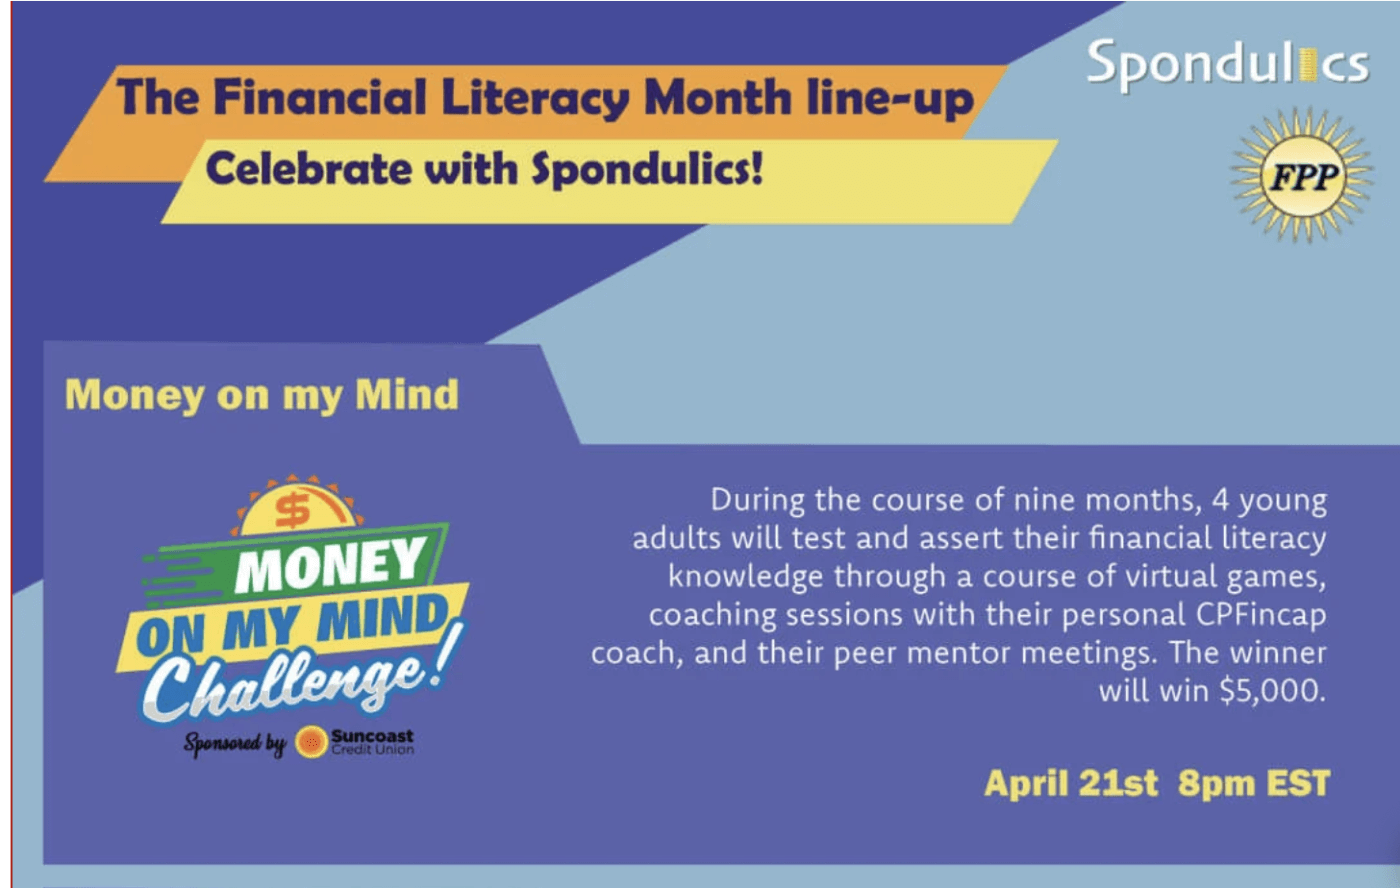 Happy Financial Literacy Month!